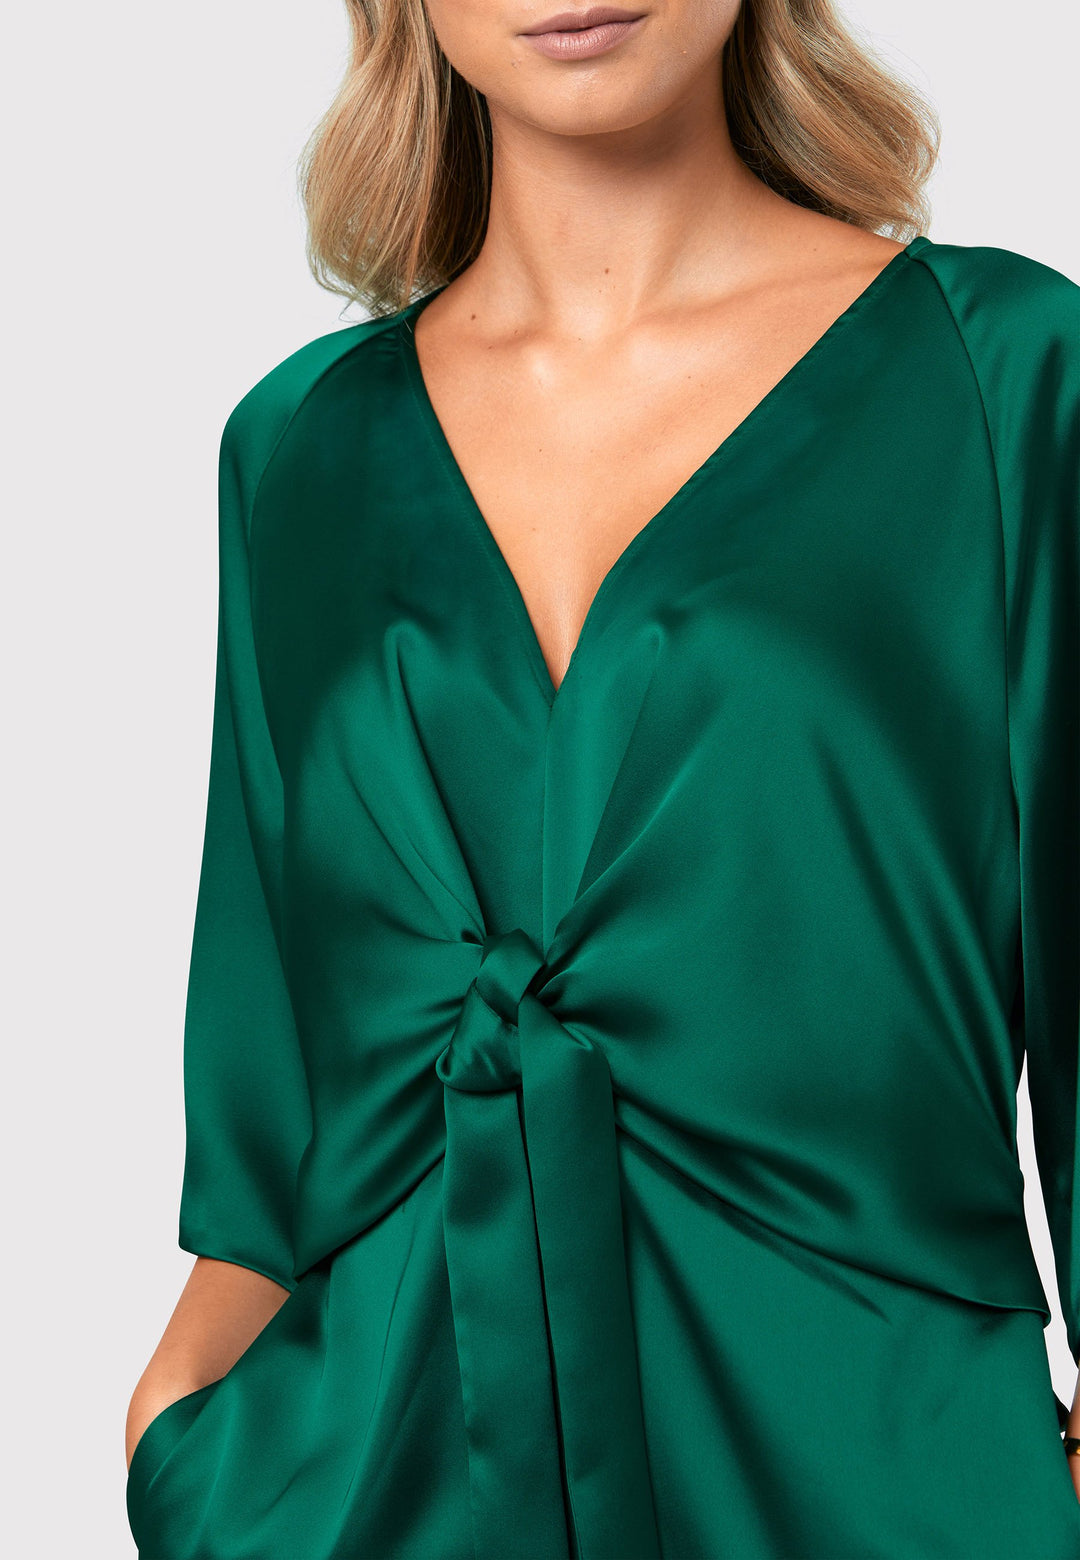 Unleash your inner Goddess with the Ailbhe dress, a vision of elegance and grace. This dress boasts an exquisitely draped silhouette, crafted from a luxurious dark emerald green satin that flows like liquid. The flattering front ties elevate the easy-fit V-neck dress, adding a touch of sophistication. Convenient side seam pockets offer practicality without compromising style. 